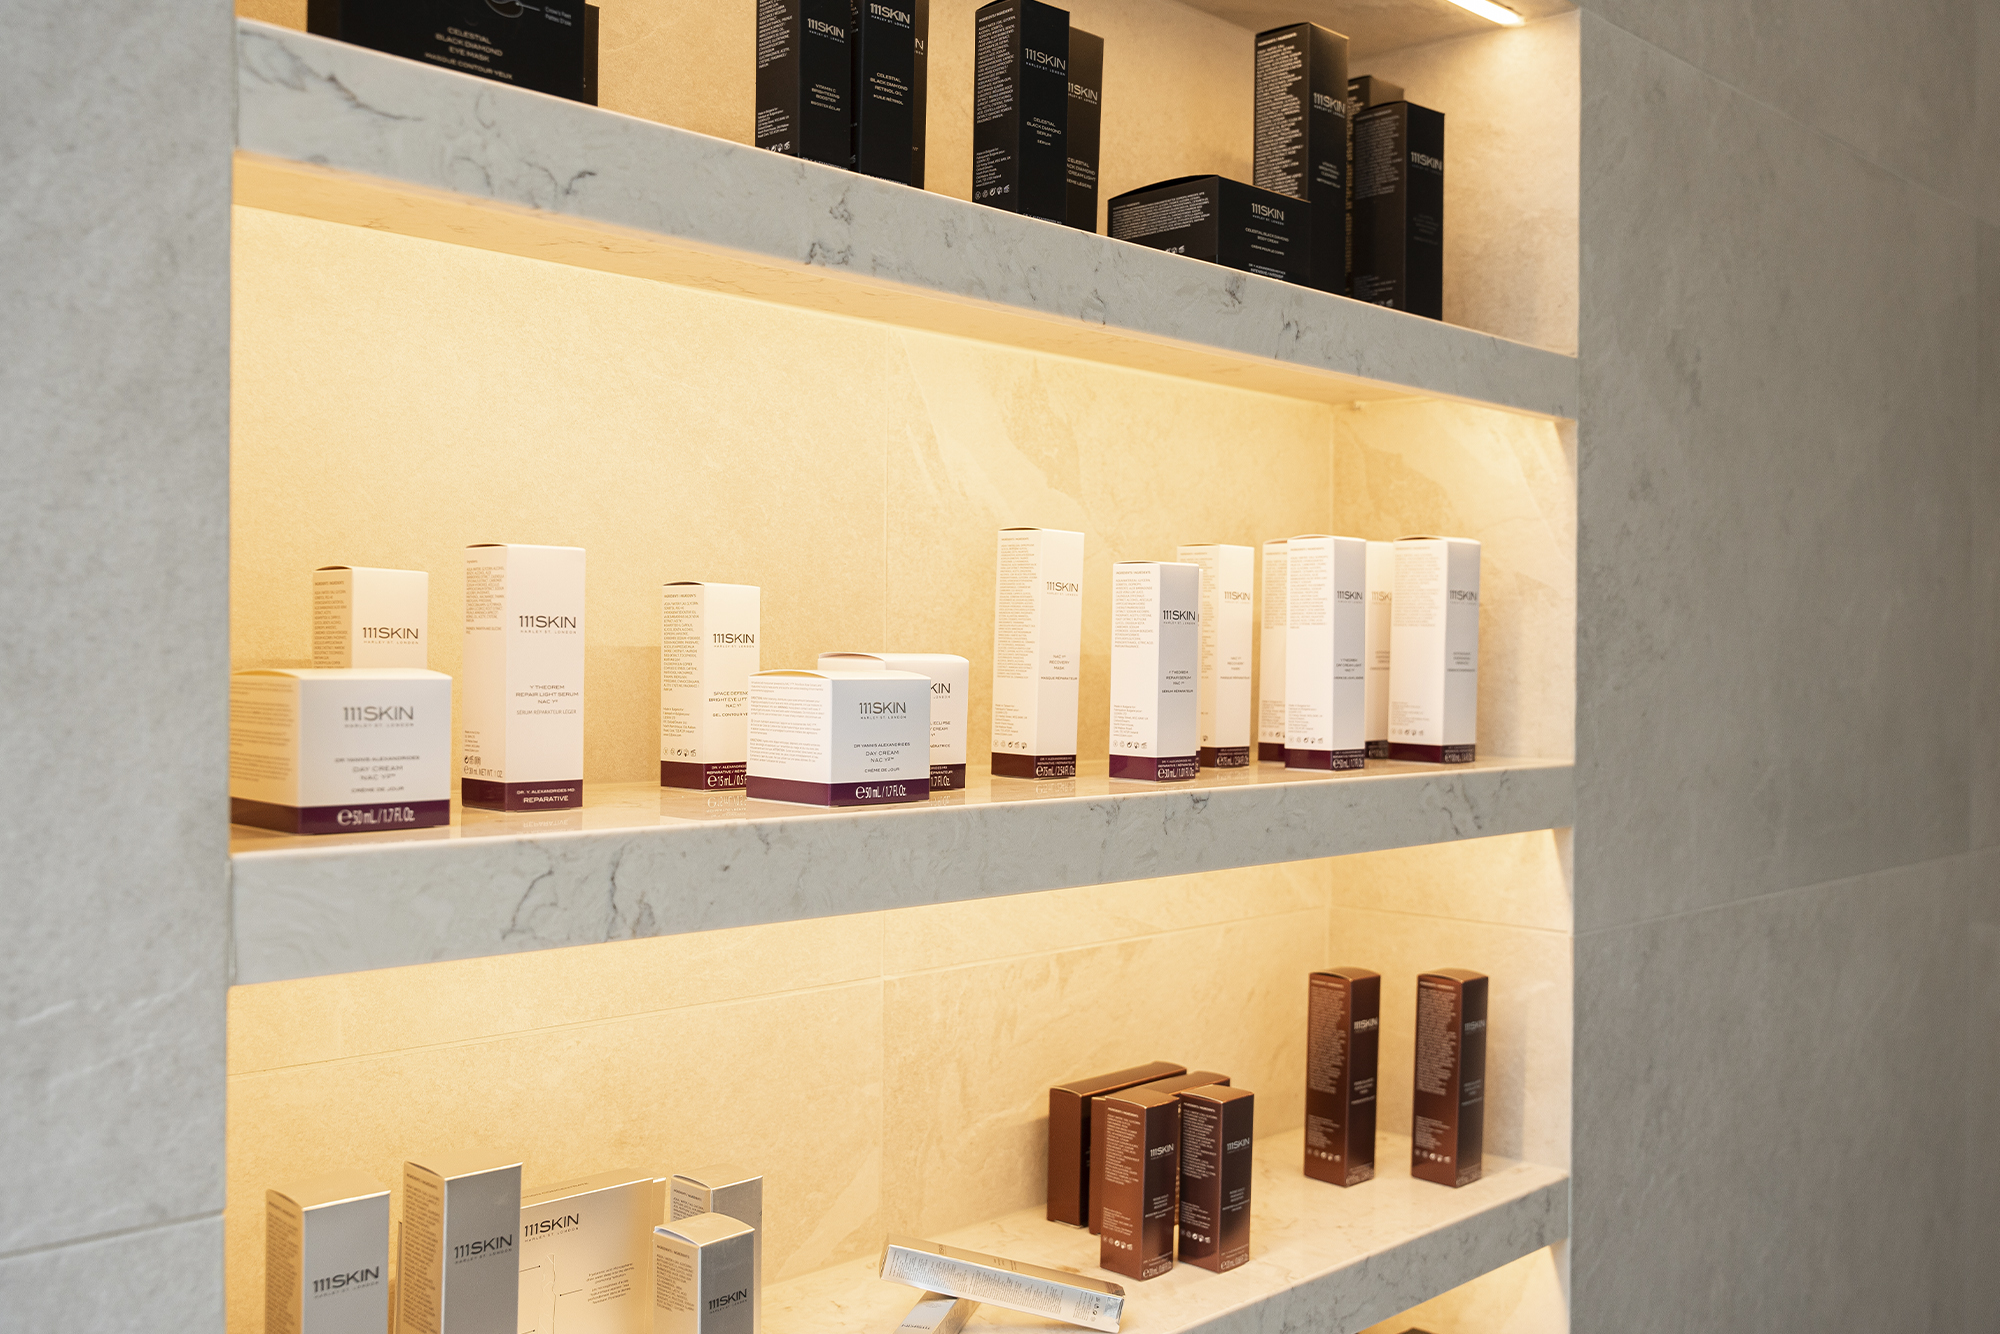 Shelf at Aman Spa Toronto showcases three shelves of skincare products: top shelf for has black containers, middle shelf has white containers, bottom shelf is white containers on left, brown containers on right.